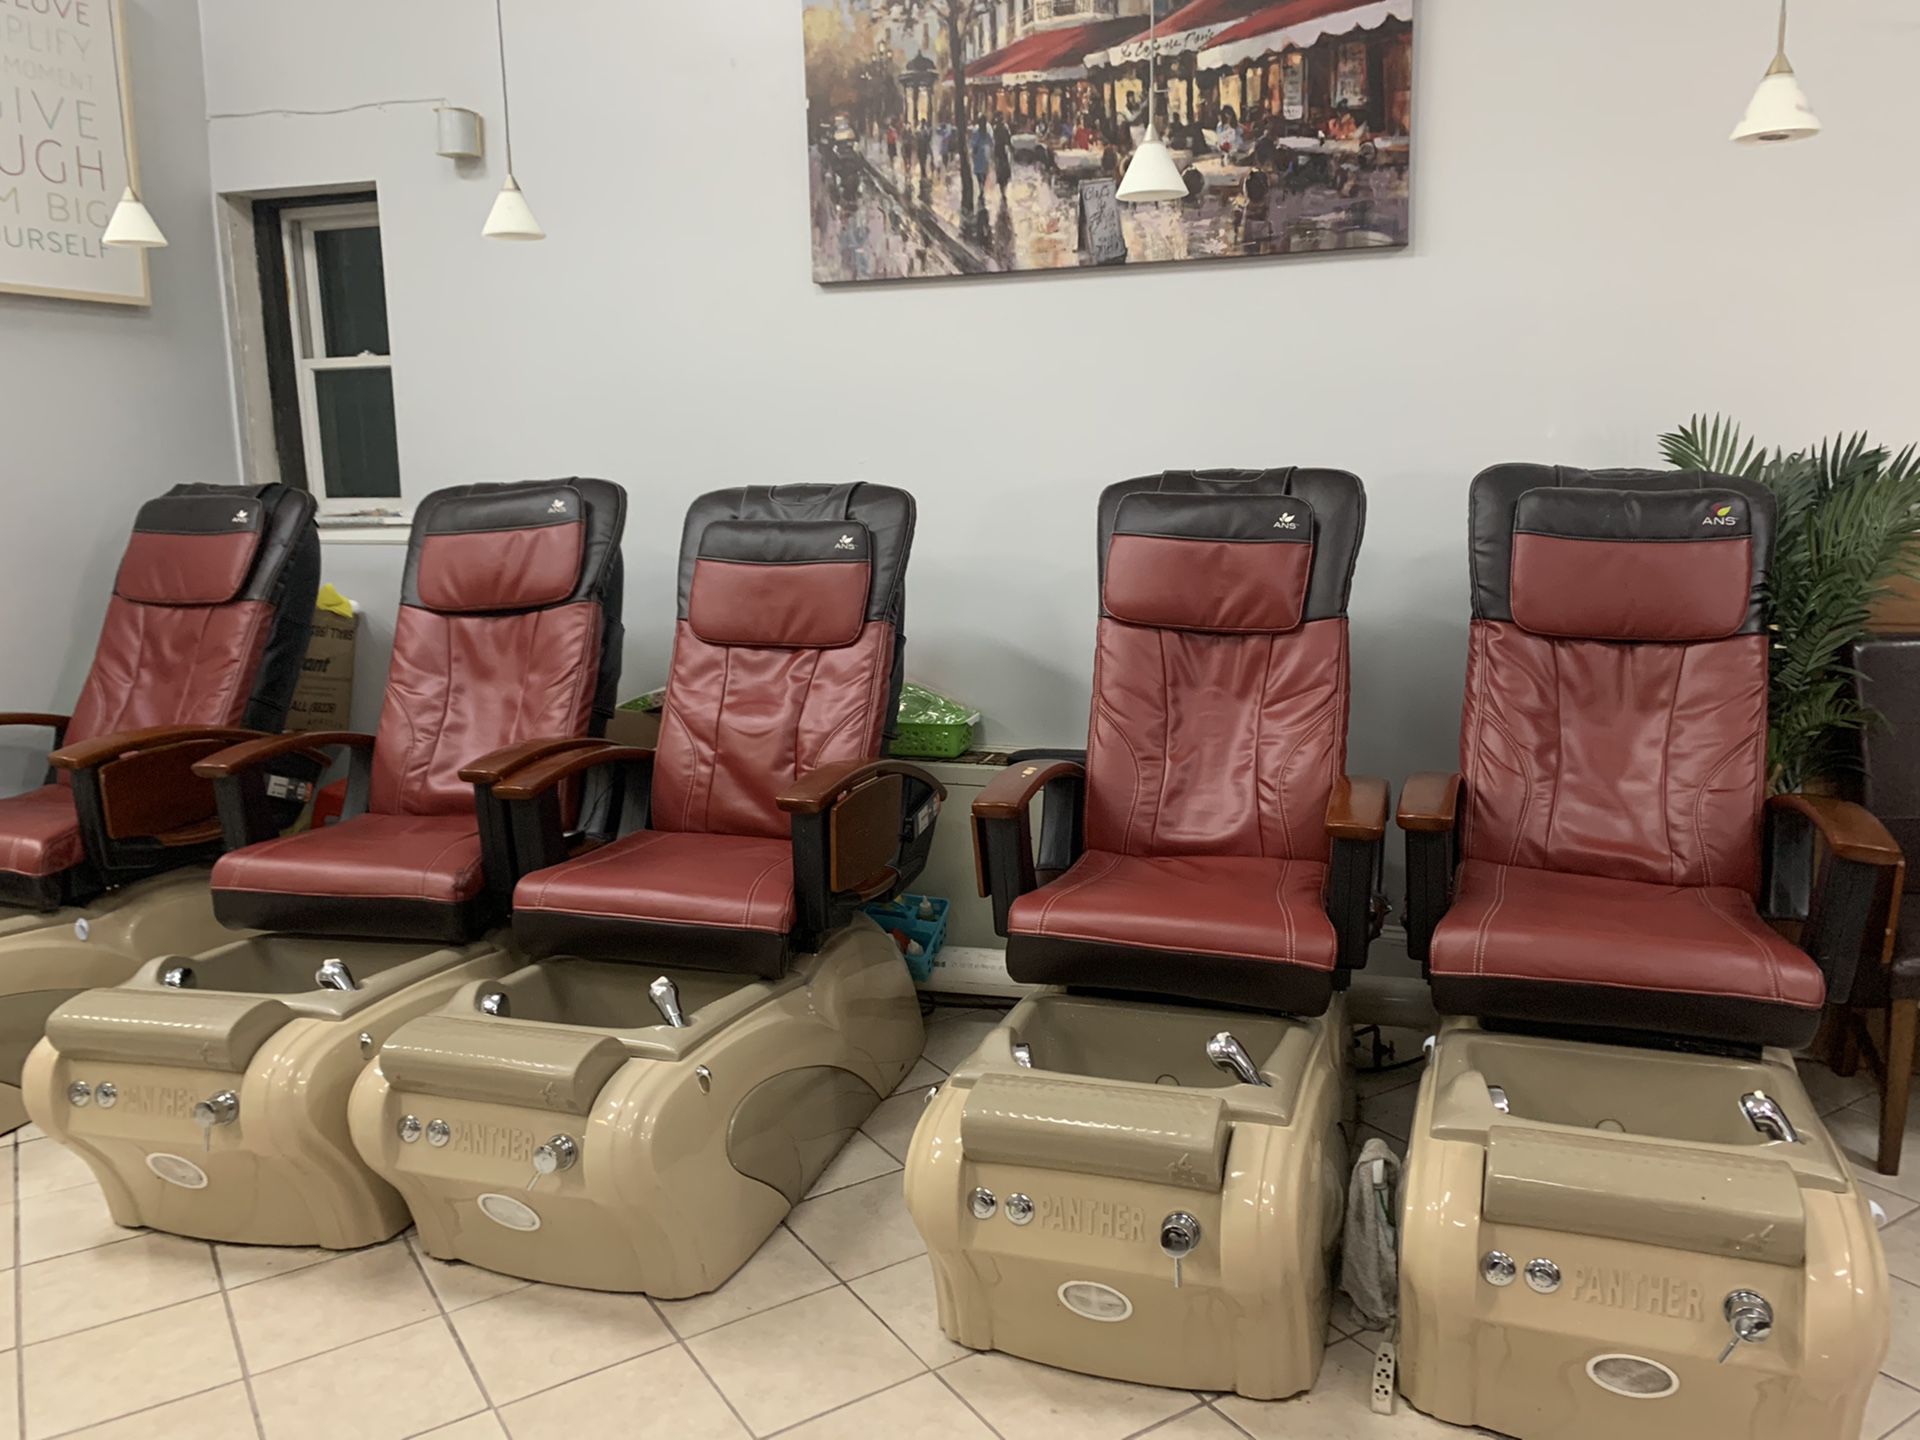 Pedicure chairs and manicure tables